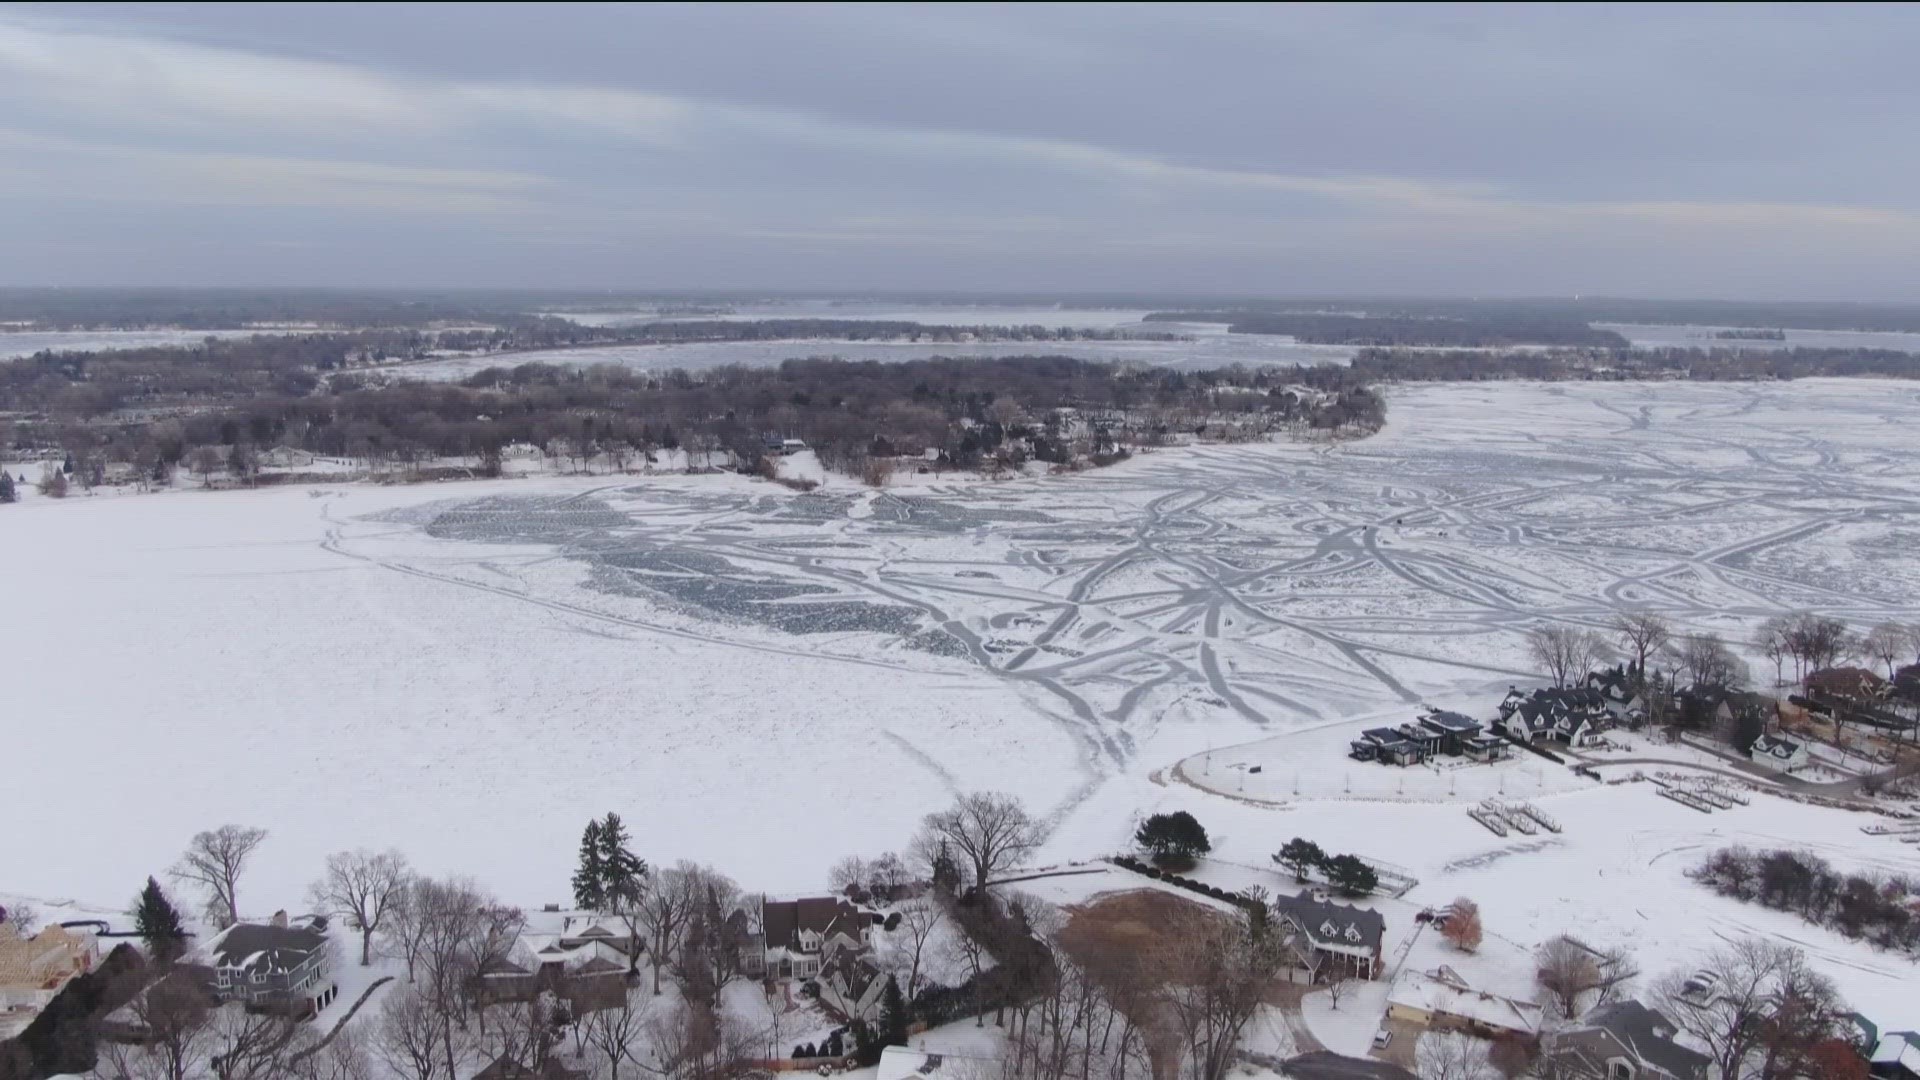 People around Lake Minnetonka have reported hearing loud booms, along with their homes shaking. A cause hasn't been confirmed but one possibility is frost quakes.